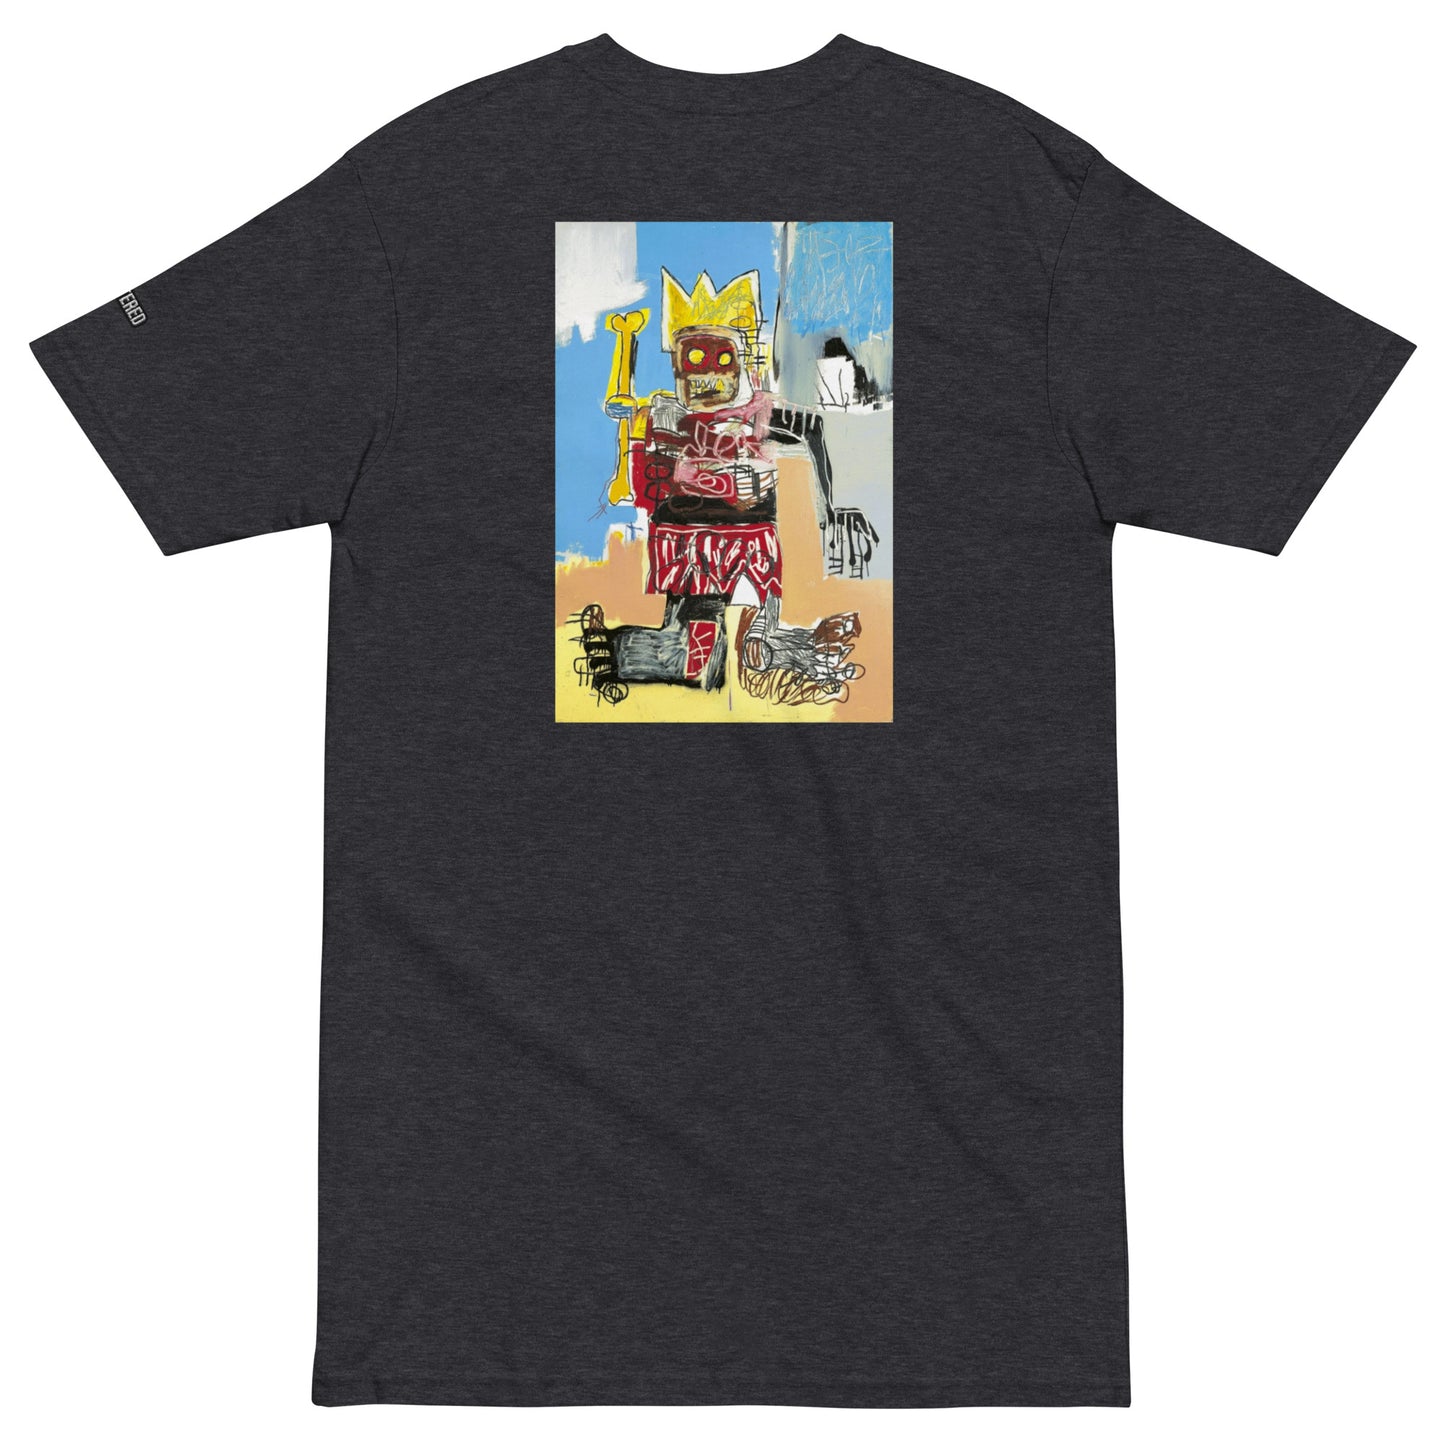 Jean-Michel Basquiat "Untitled" Artwork Embroidered + Printed Premium Charcoal Grey Streetwear T-shirt SCattered